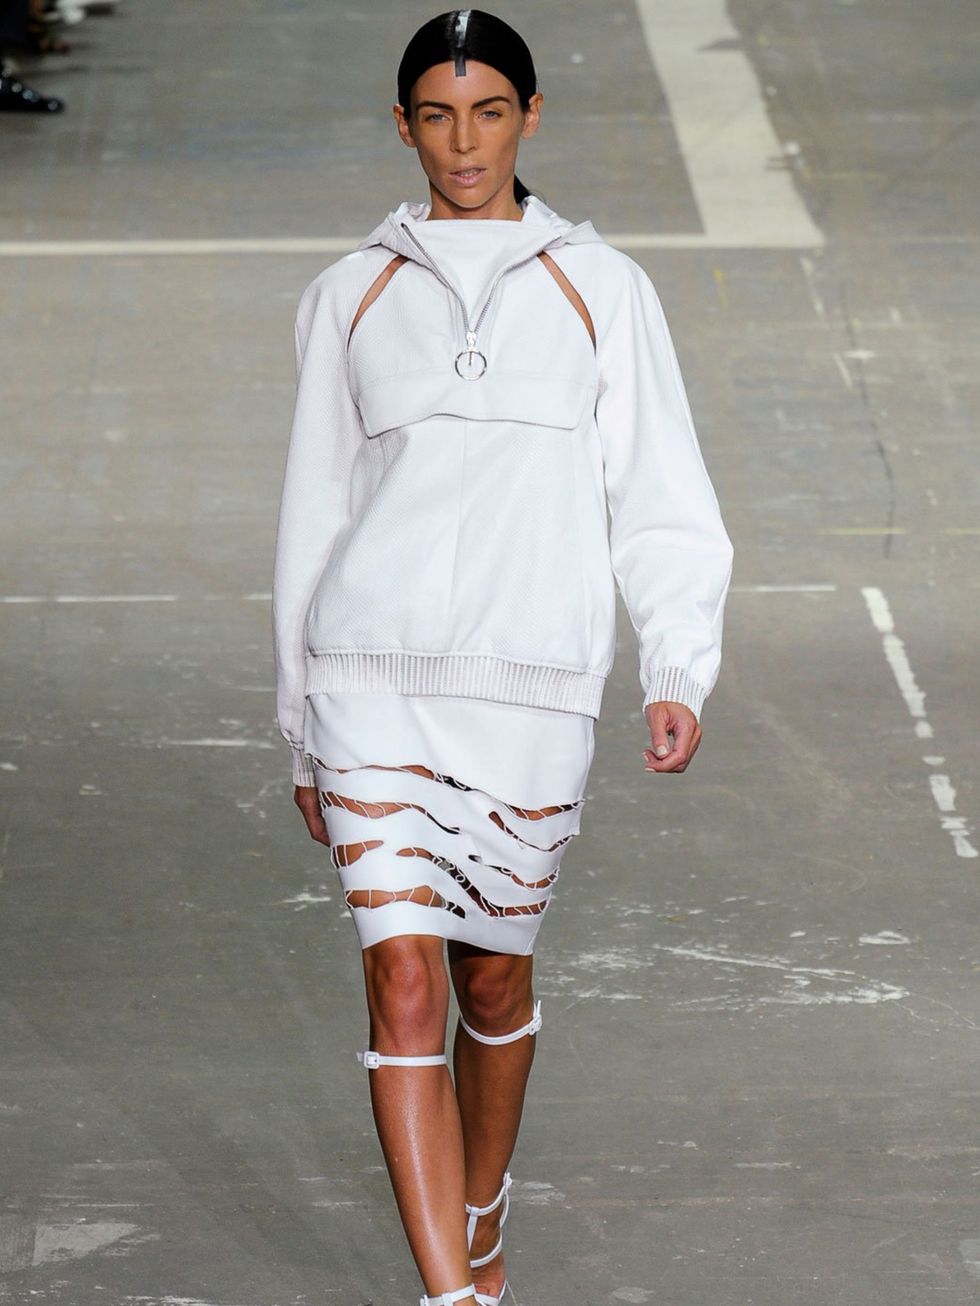 <p>Liberty Ross walking for Alexander Wang's Spring Summer 13 show in New York.</p>